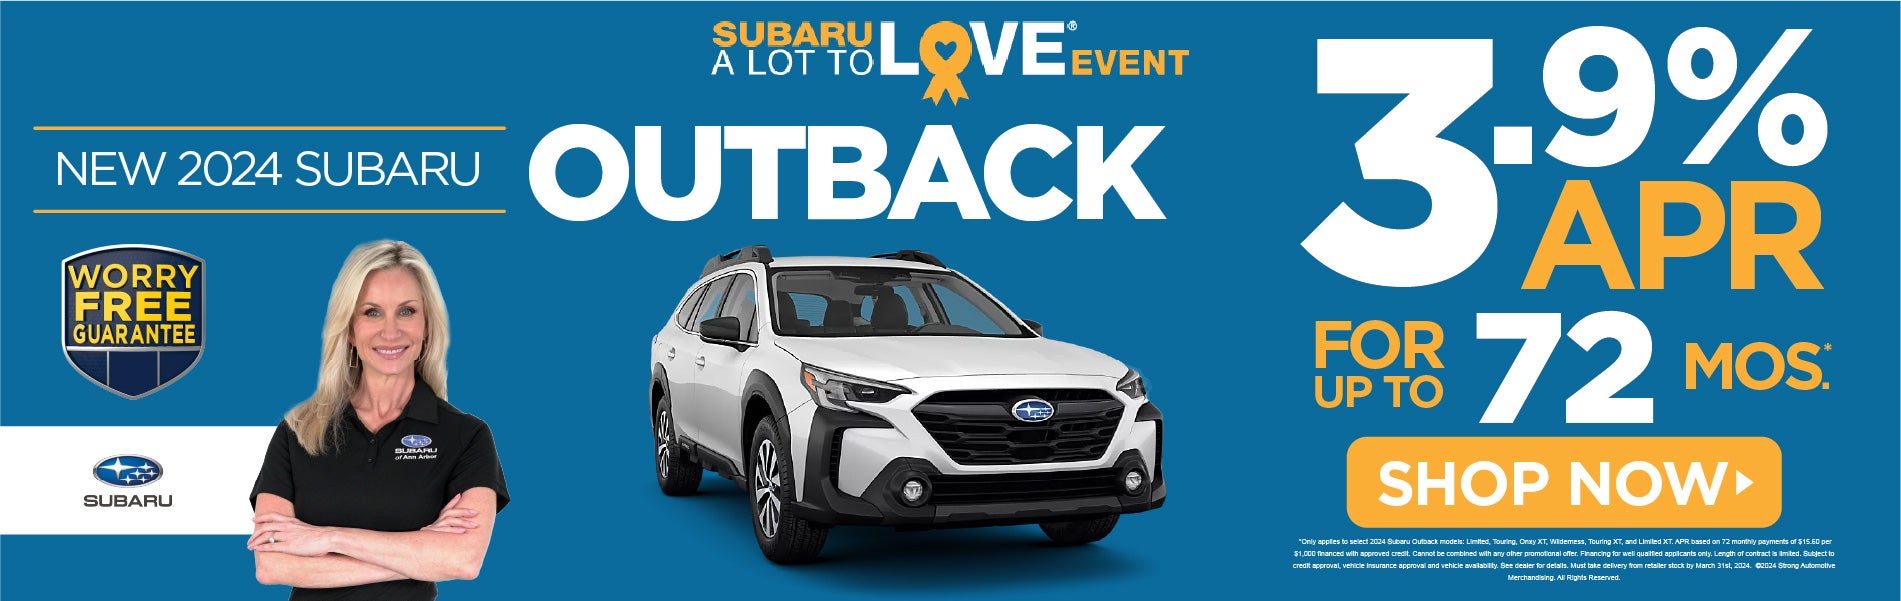 outback 3.9% APR